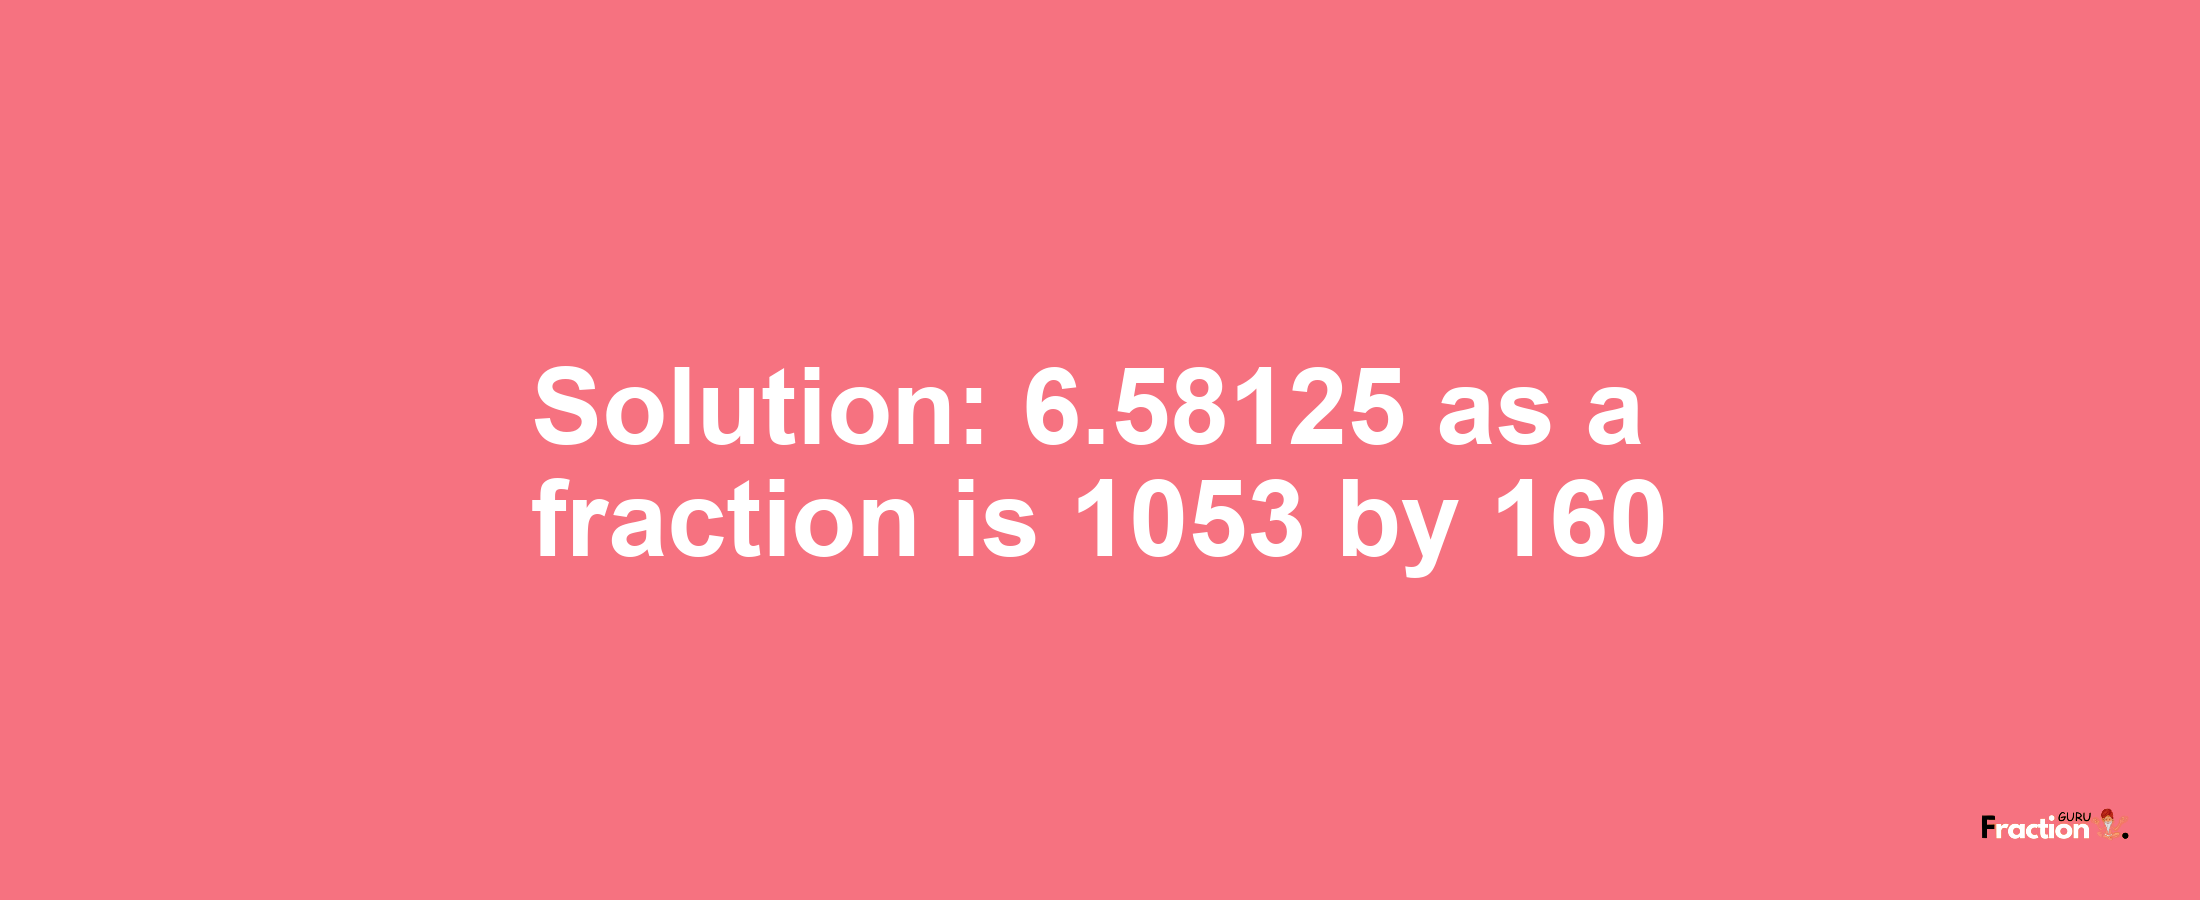 Solution:6.58125 as a fraction is 1053/160